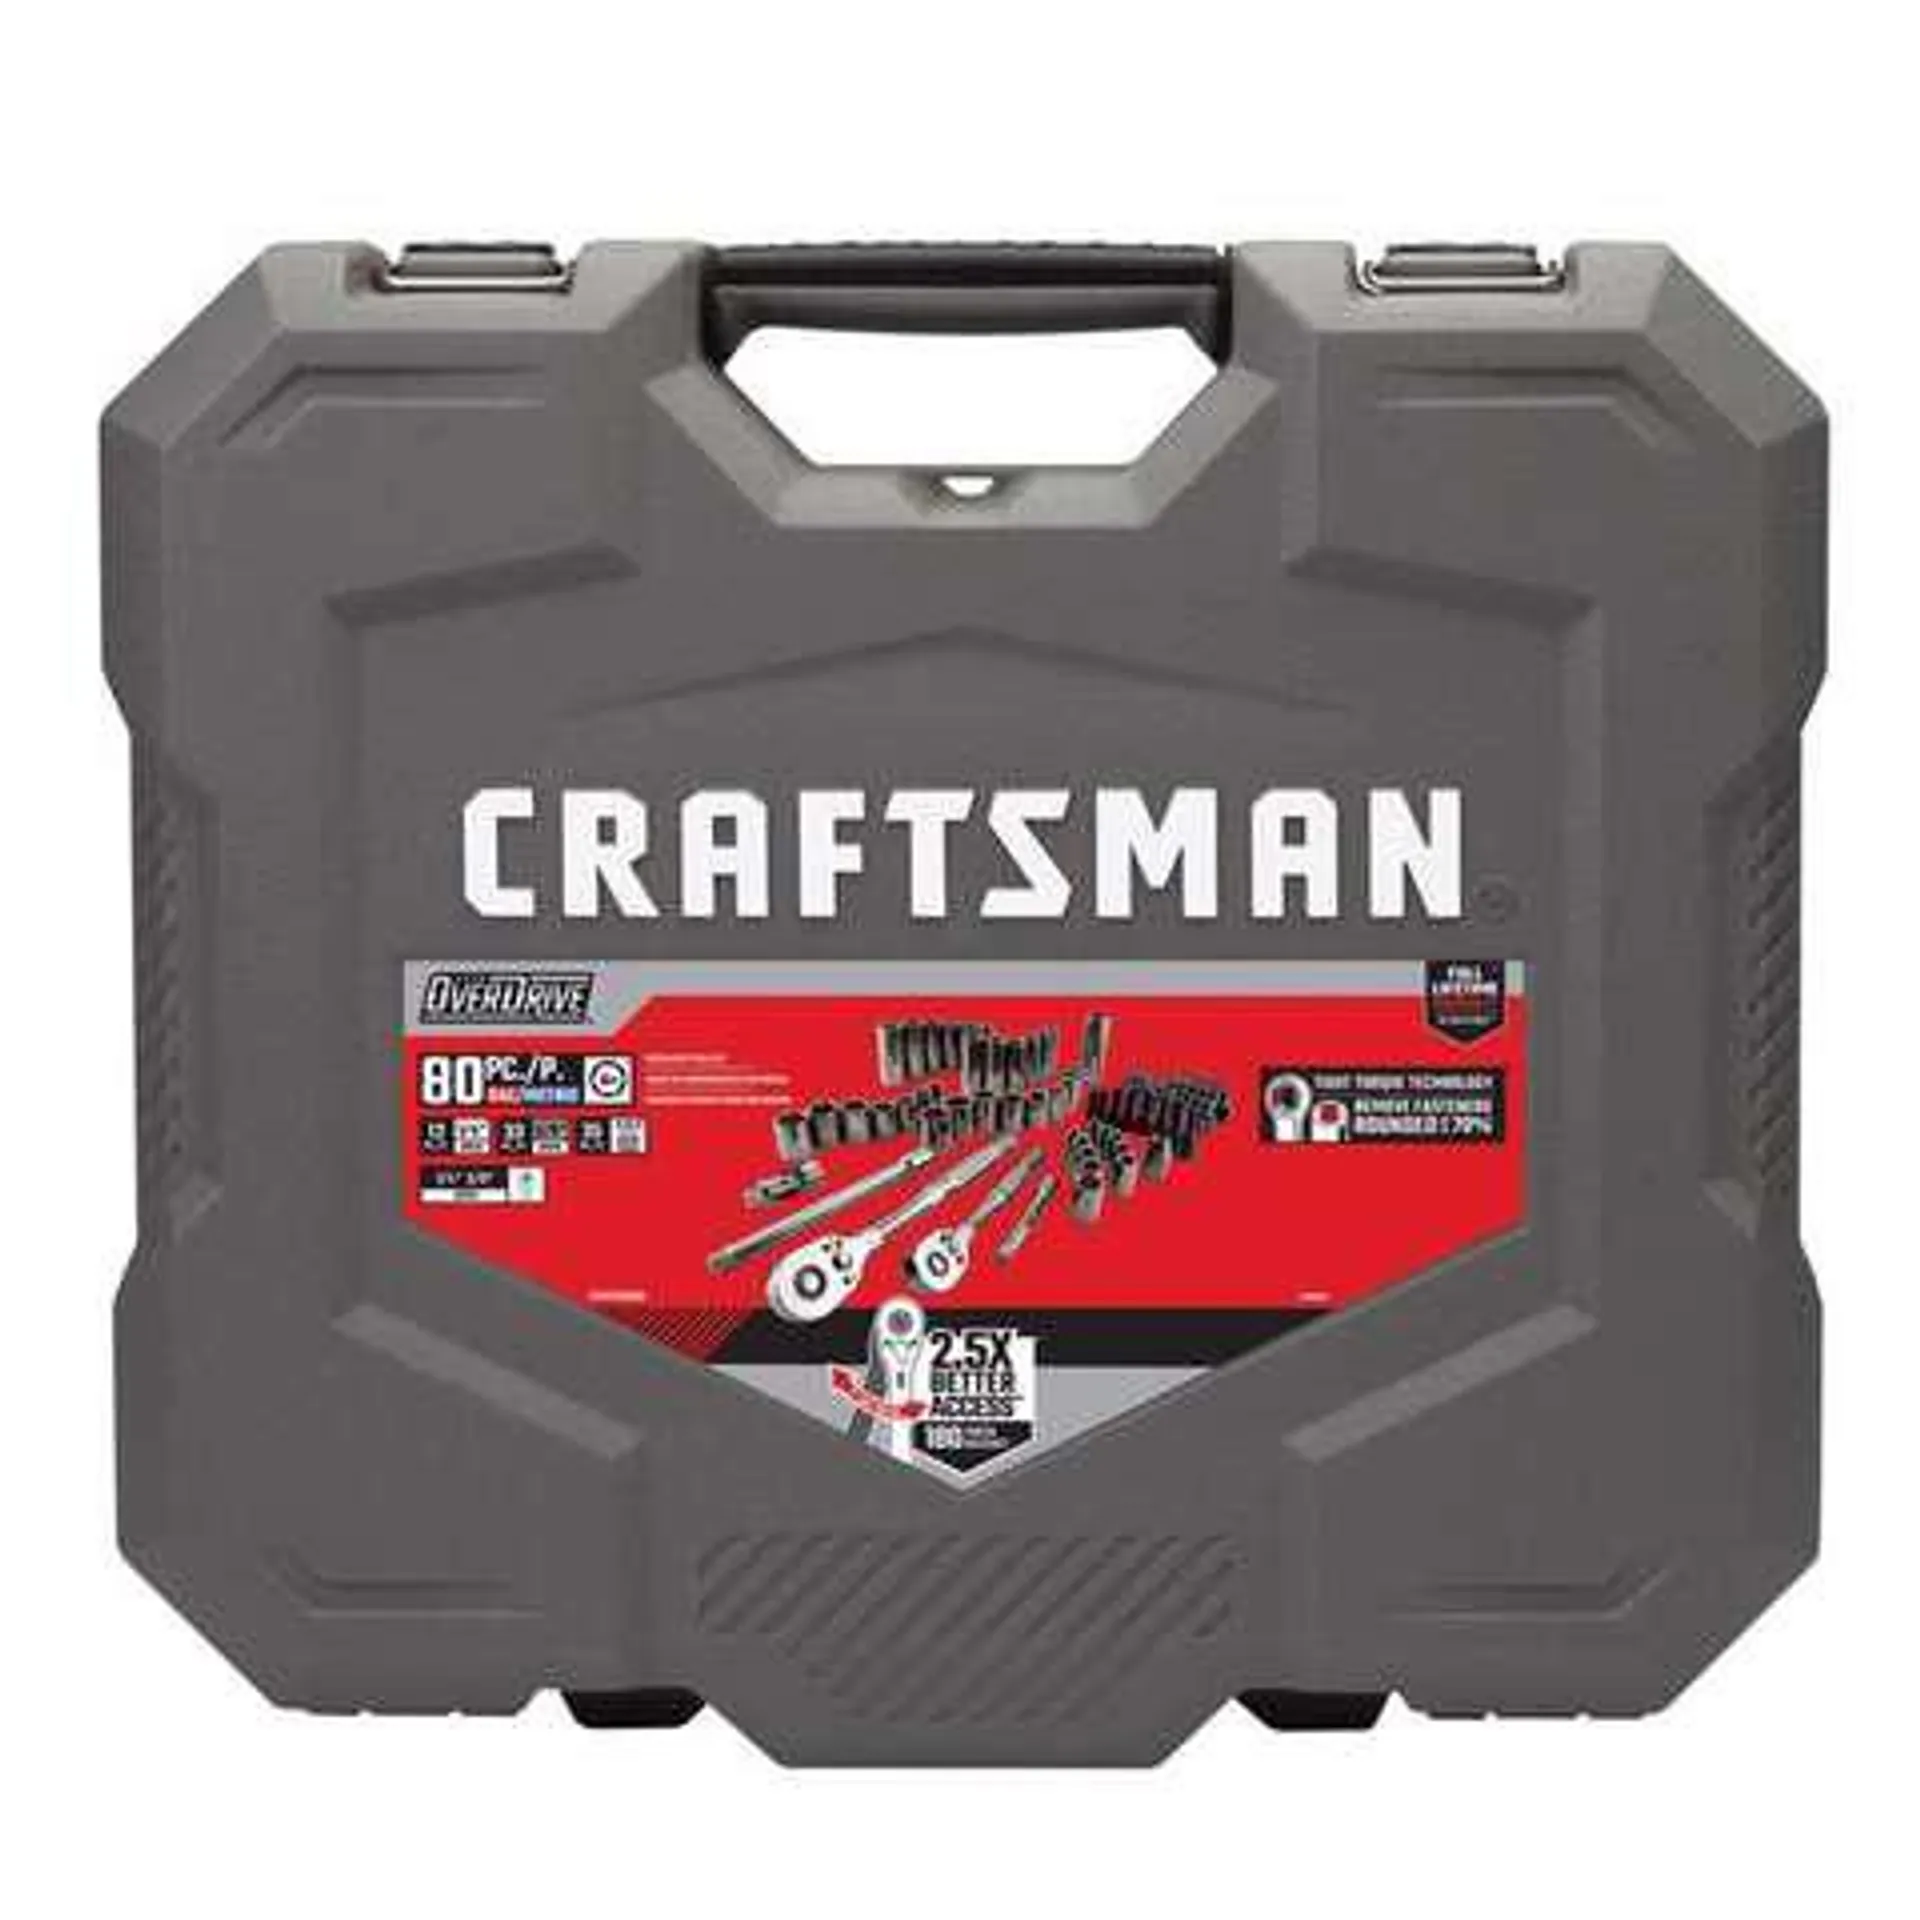 Craftsman OVERDRIVE 1/4 and 3/8 in. drive Metric/SAE 6 Point Mechanic's Tool Set 80 pc